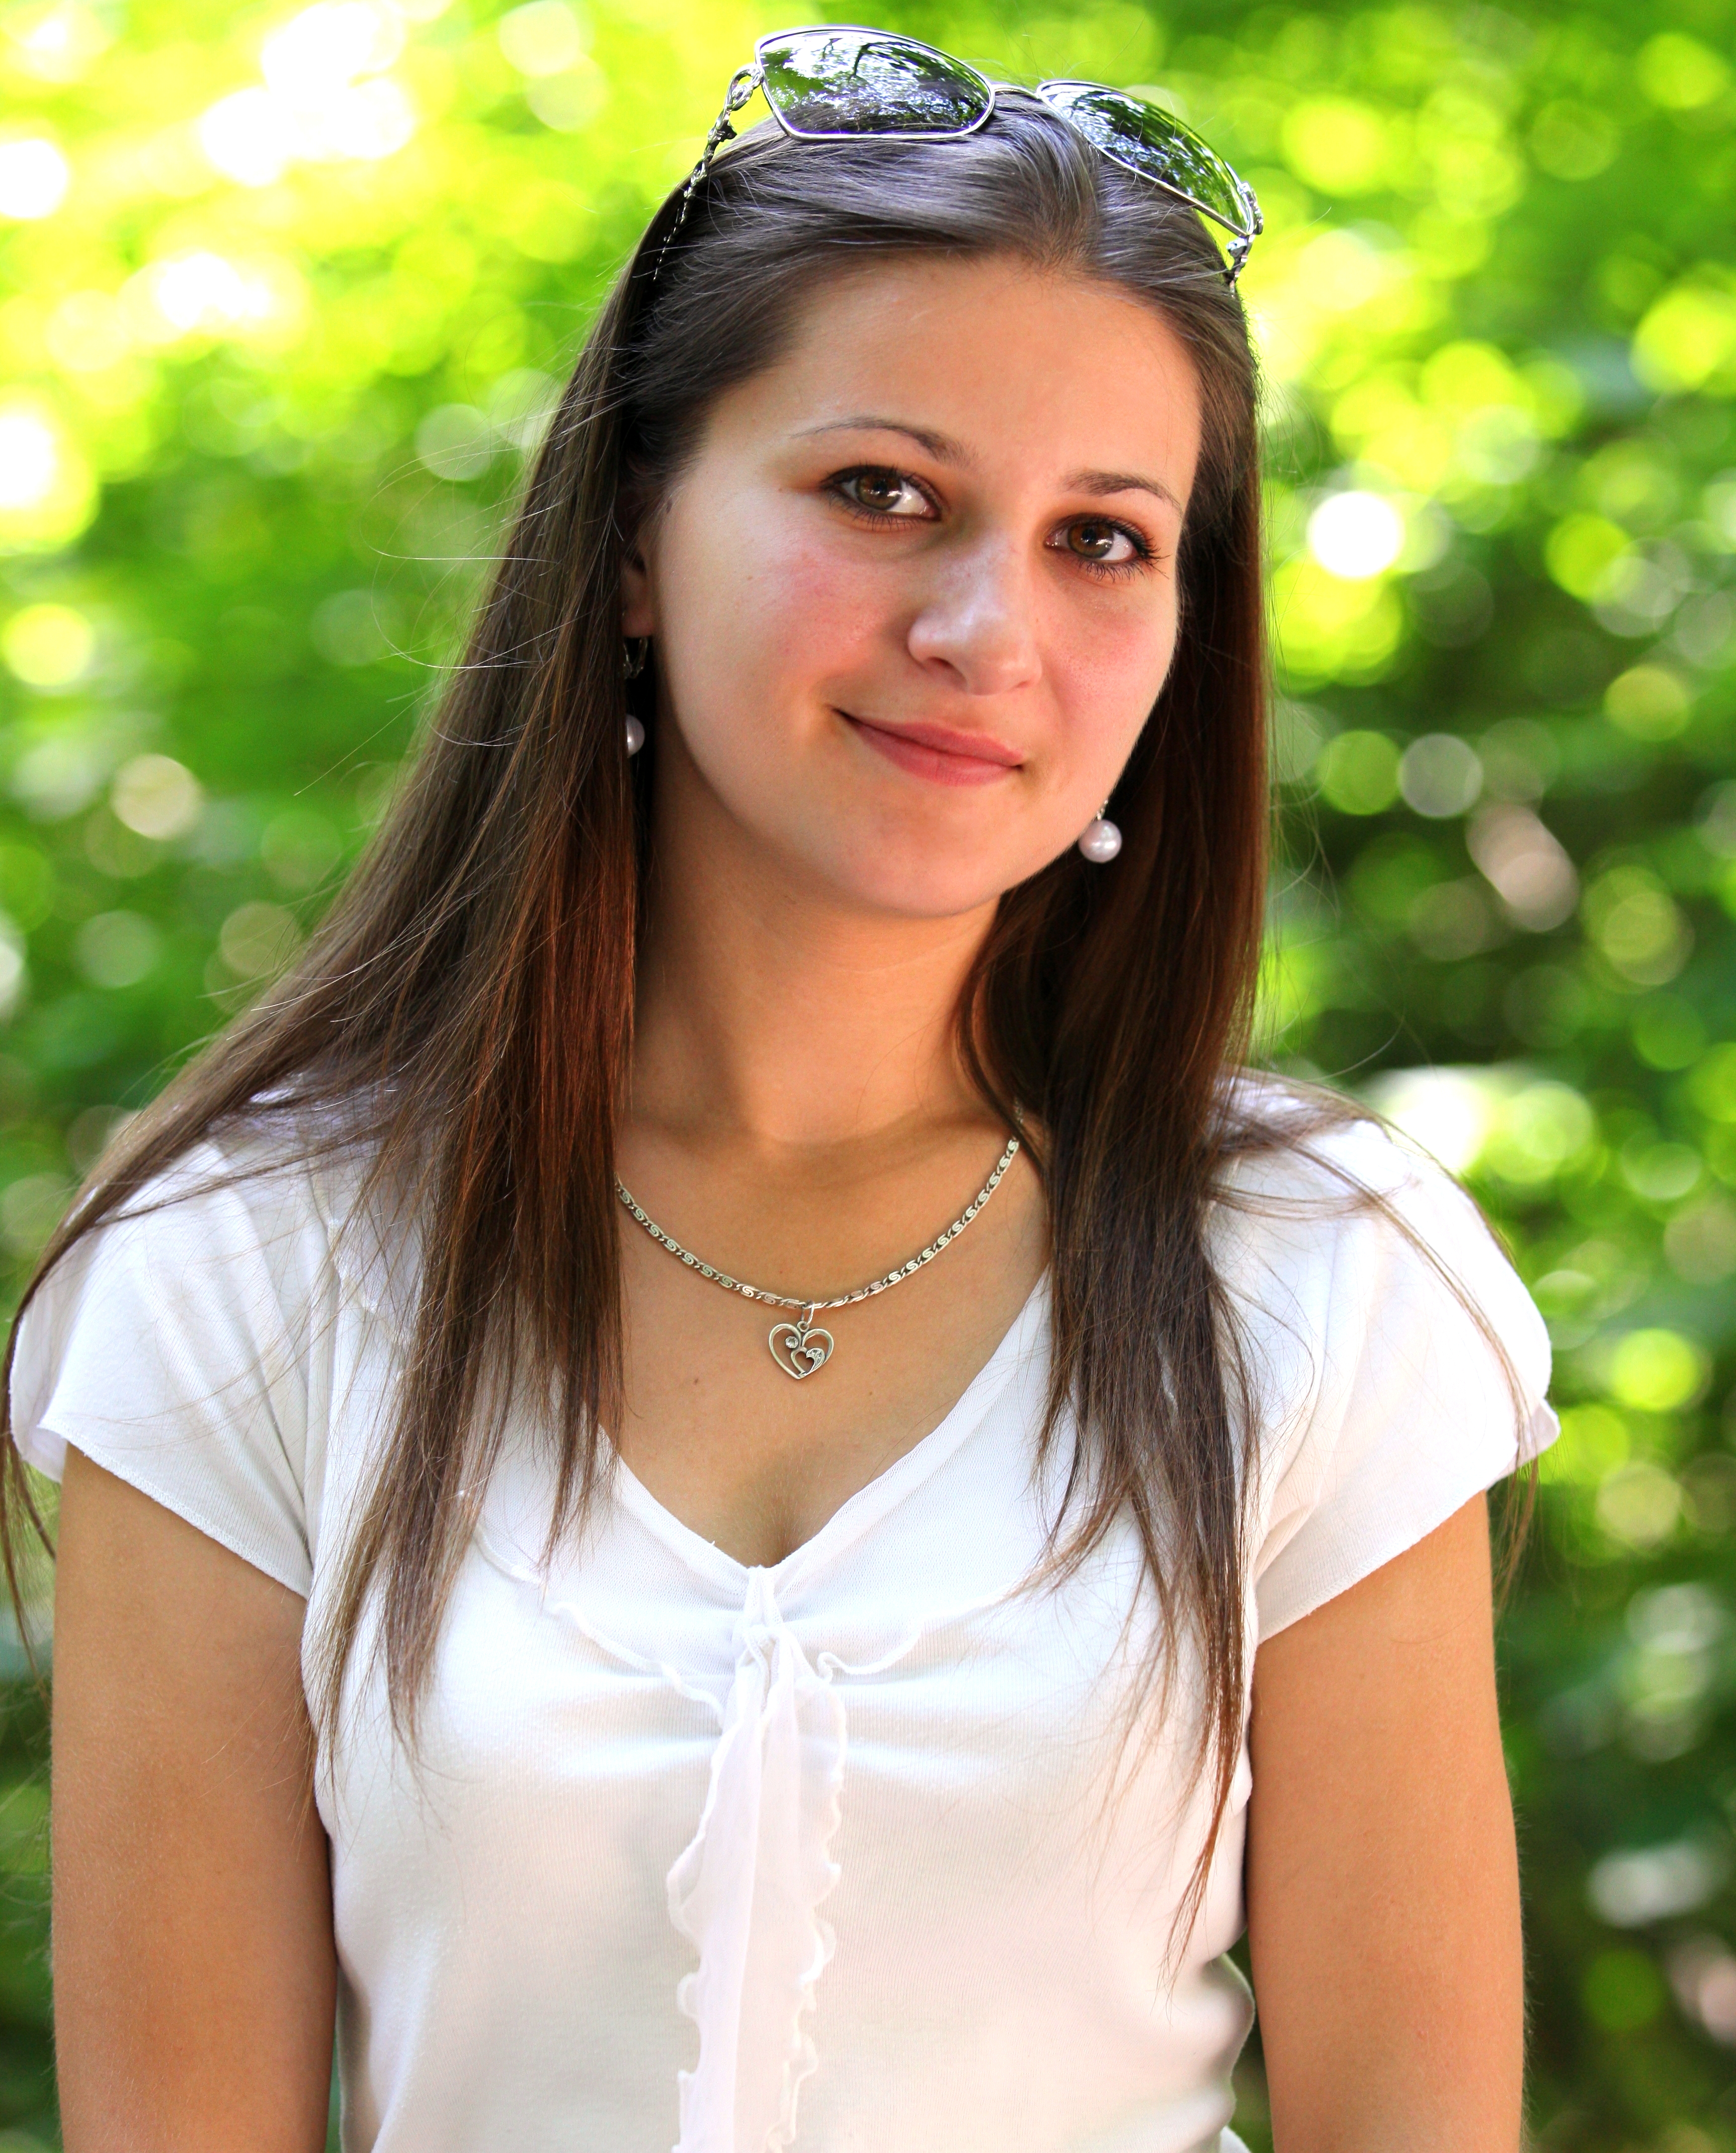 a very attractive girl (a Catholic Christian), photographed in July 2013, picture 6/22